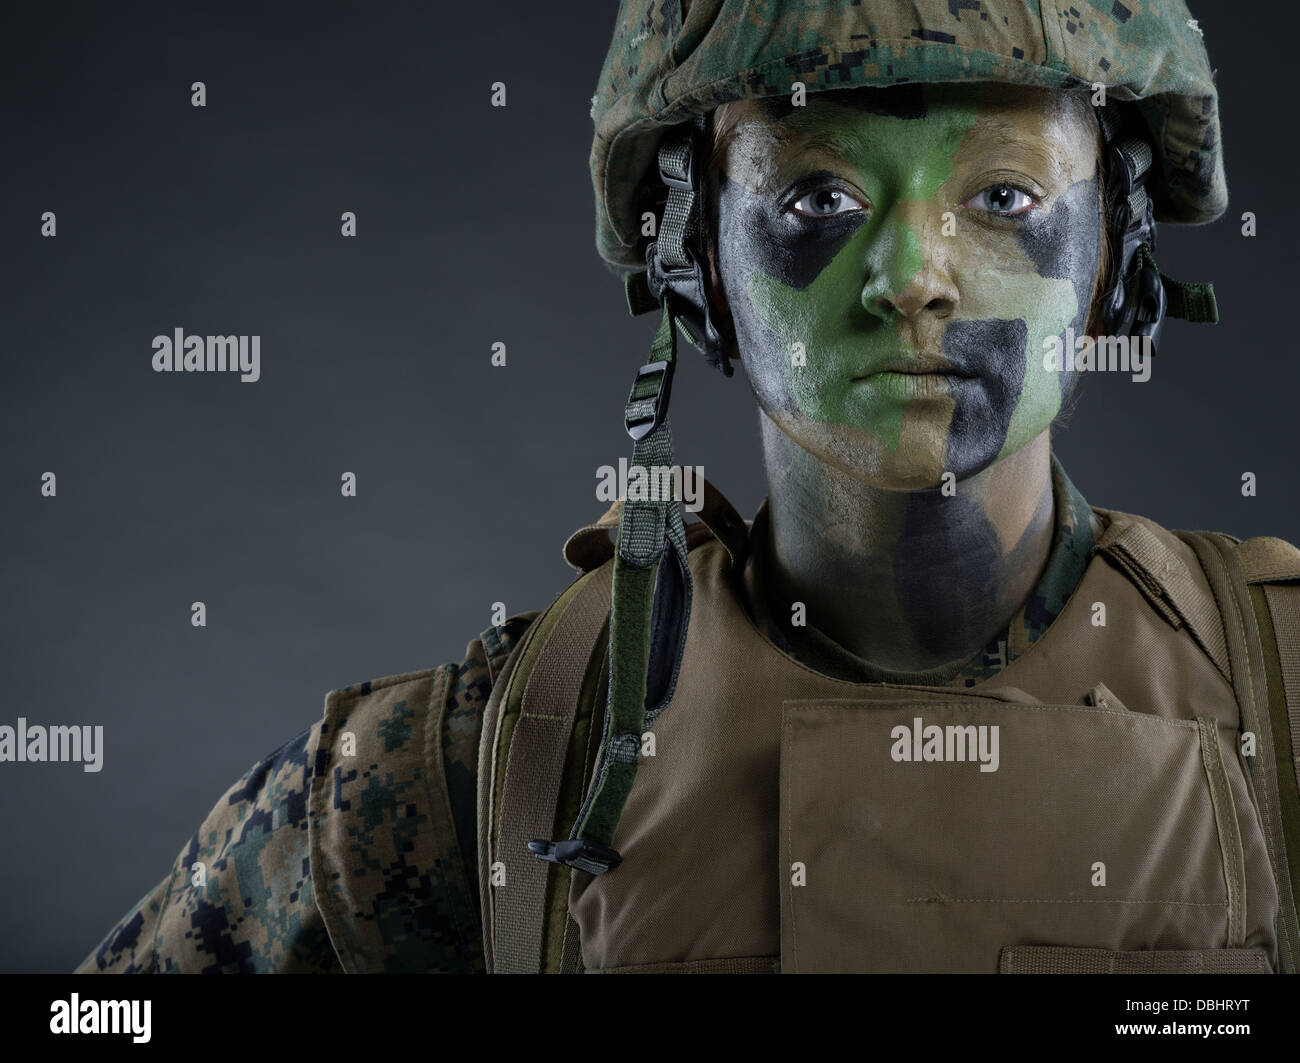 Portrait of Female United States Marine Corps Soldier in utility uniform MARPAT pixelated camouflage with camo face paint Stock Photo